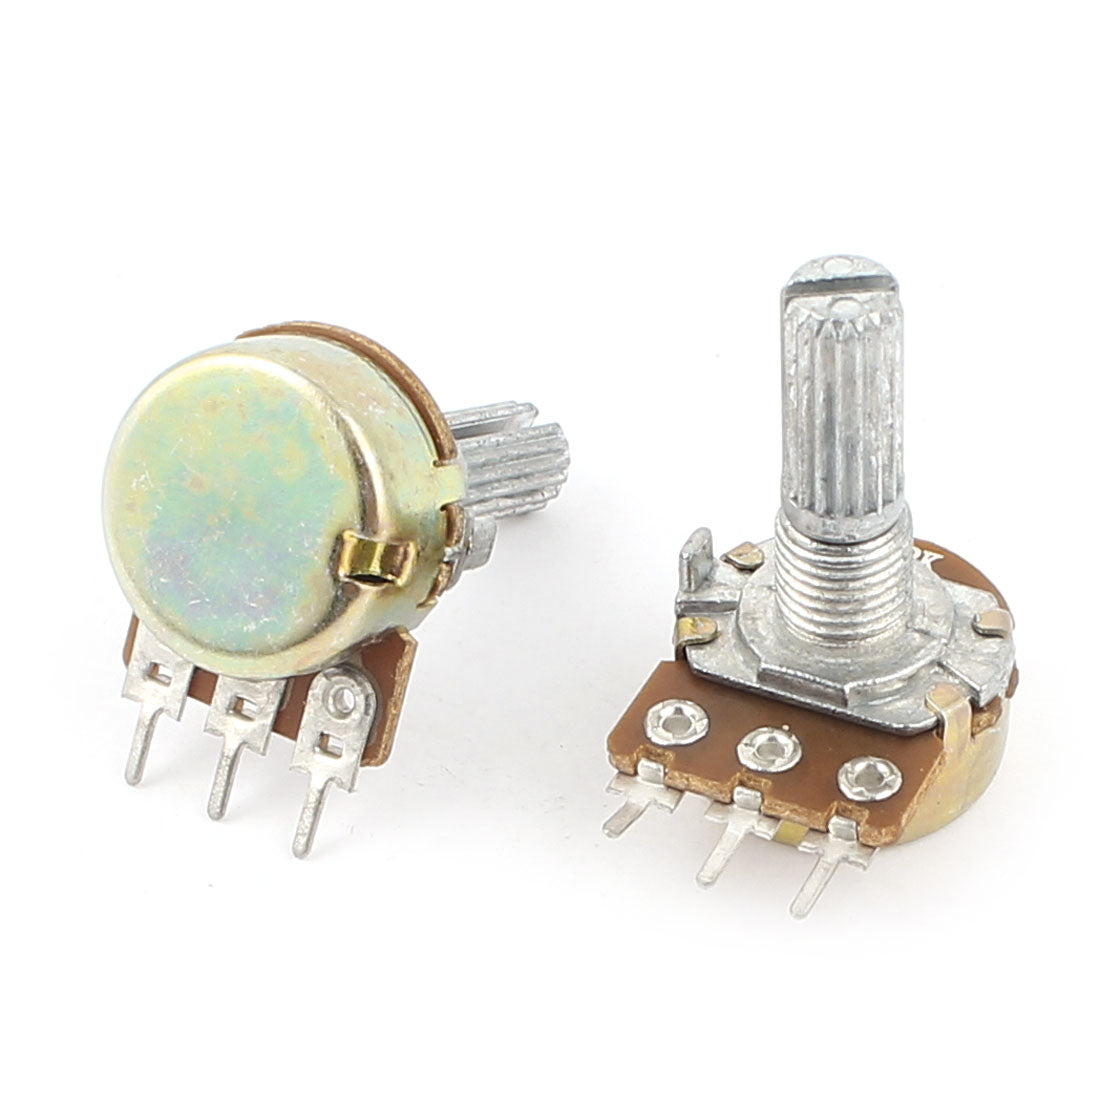 uxcell Uxcell 2PCS 2K Ohm 3 Pin Knurled Shaft Linear Rotary Taper Potentiometer B2K